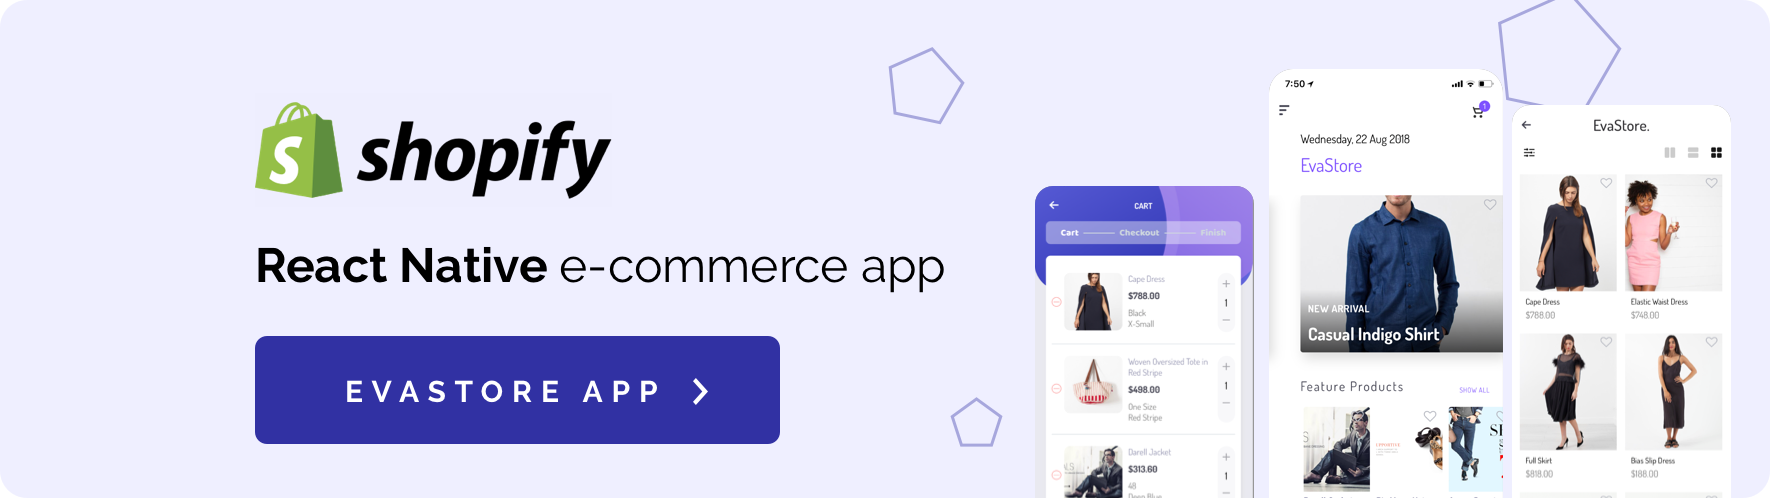 MStore Opencart - the complete react native e-commerce app (Expo version) - 13